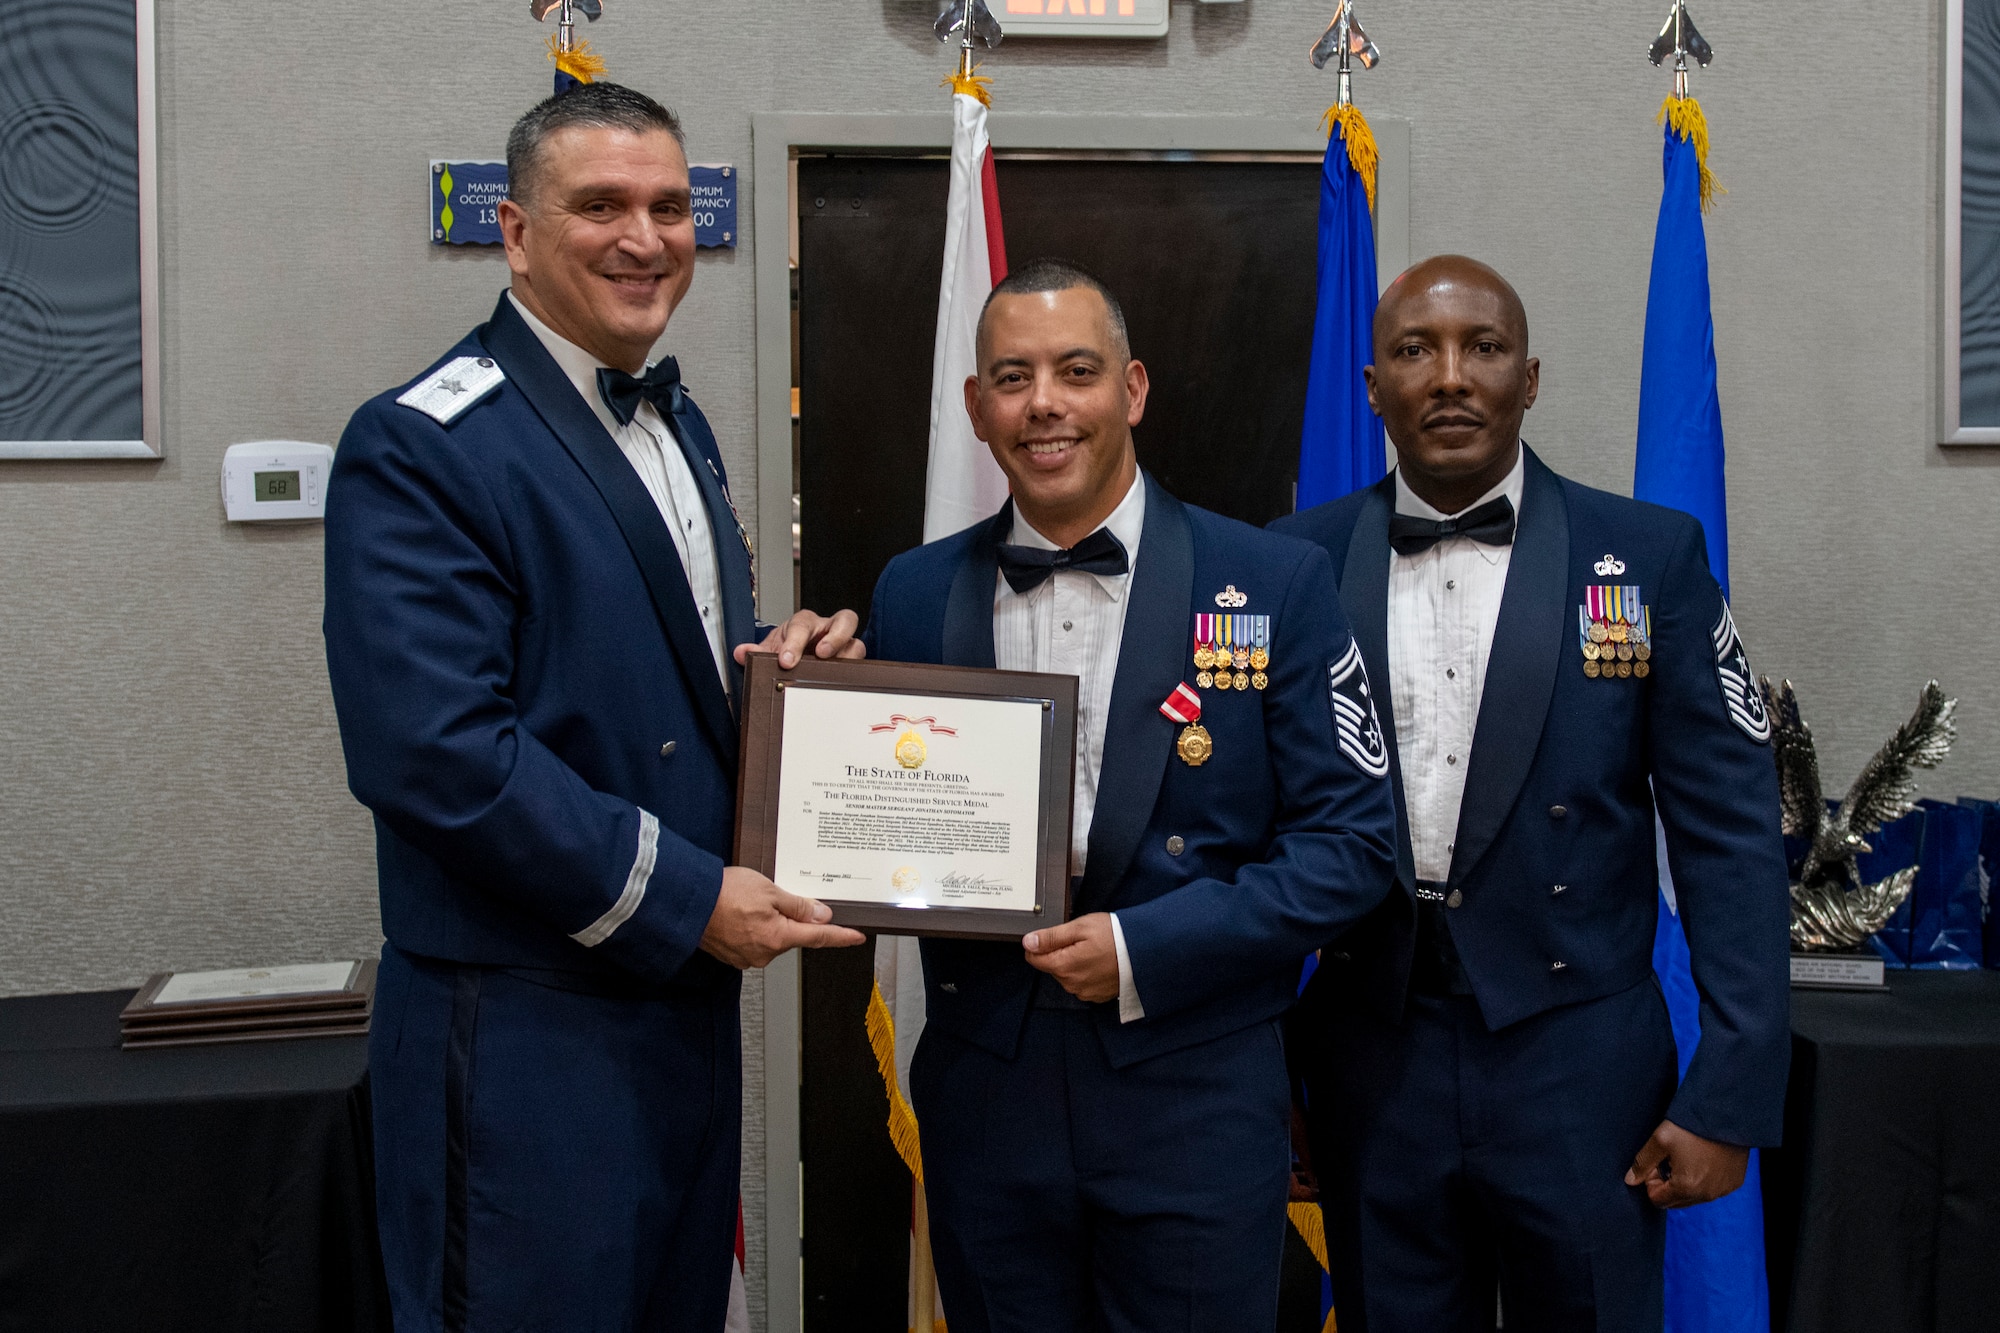 Senior Master Sgt. Jonathan Sotomayor receives the Florida Distinguished Service Medal at the Florida Air National Guard's Airman of the Year banquet held in Jacksonville, Fla. on January 8, 2022. Sotomayor holds the title of Airman of the Year for the First Sergeant category this year. The Airman of the Year award program is designed to recognize Airmen who display superior leadership, job performance and personal achievement during the prior calendar year. (U.S. Air National Guard photo by Senior Airman Jacob Hancock)